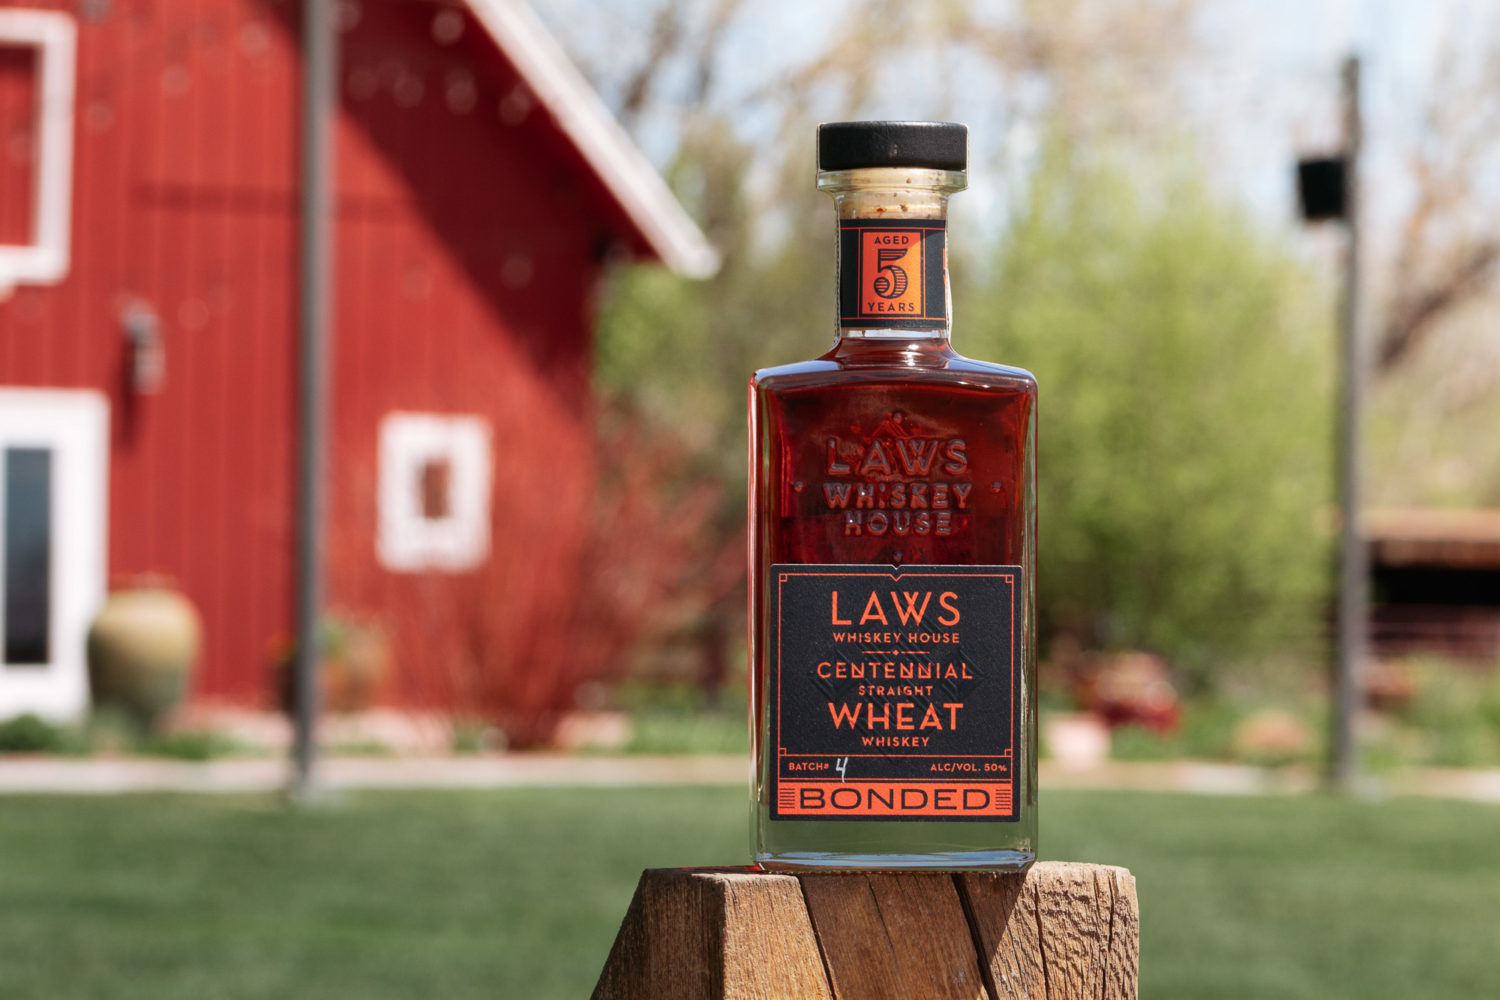 Laws Whiskey House Centennial Wheat Fence